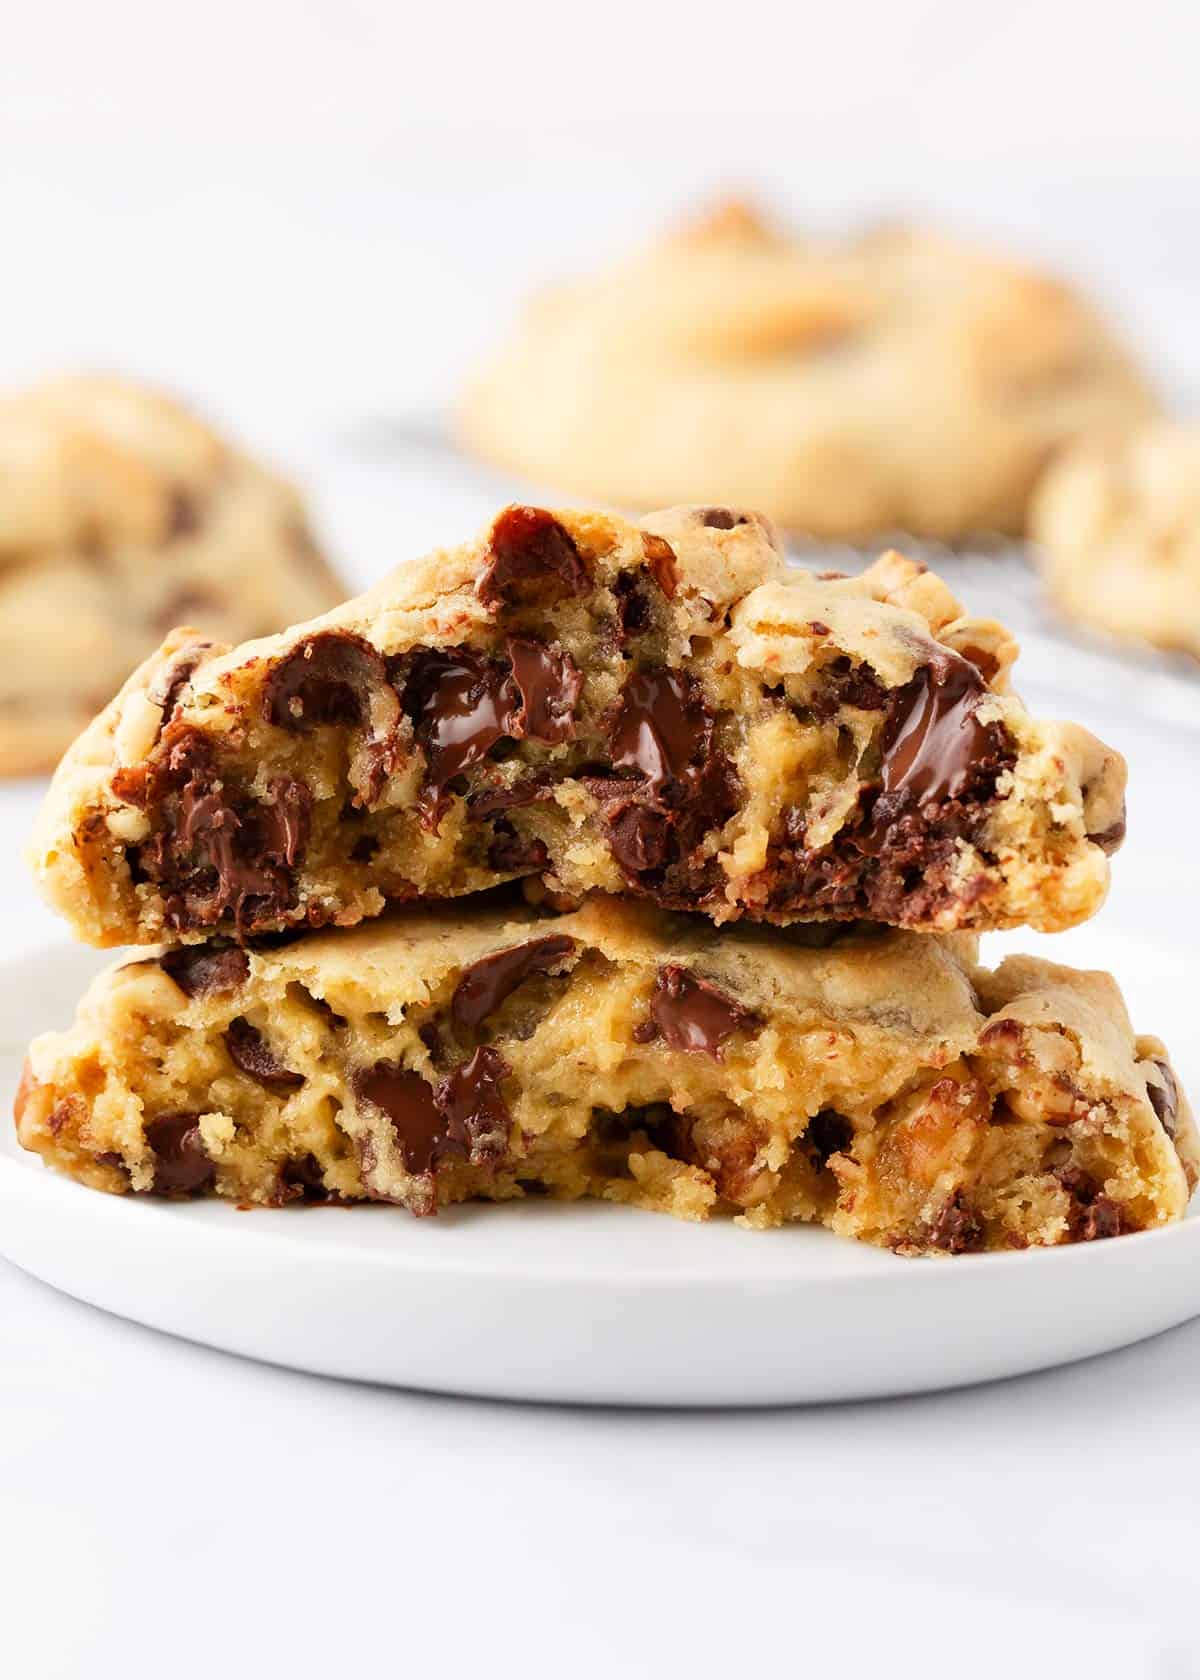 Levain chocolate chip cookies on a plate.